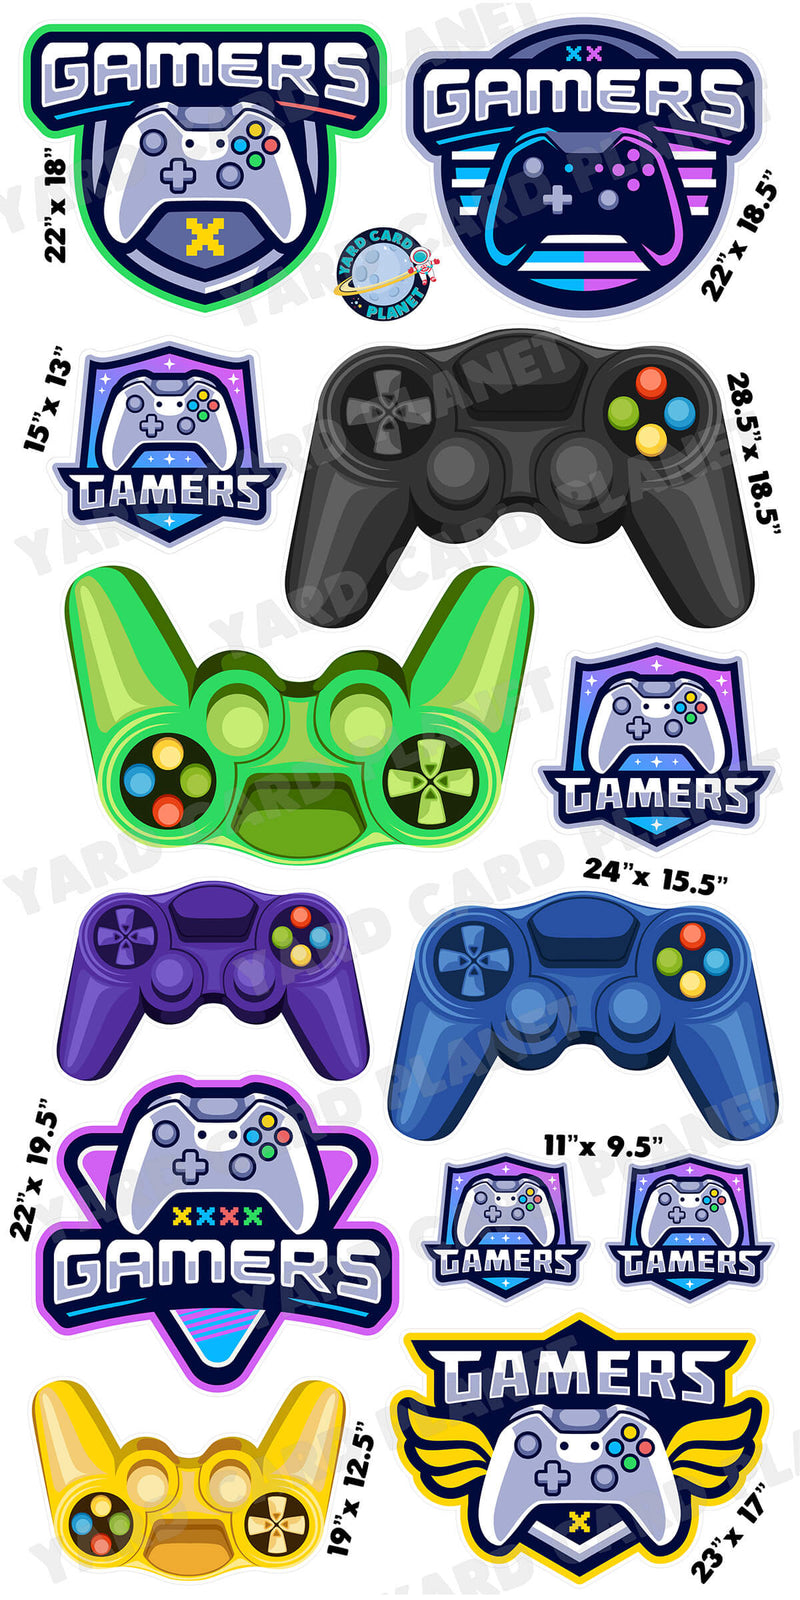 We Are Gamers Video Game Yard Card Flair Set